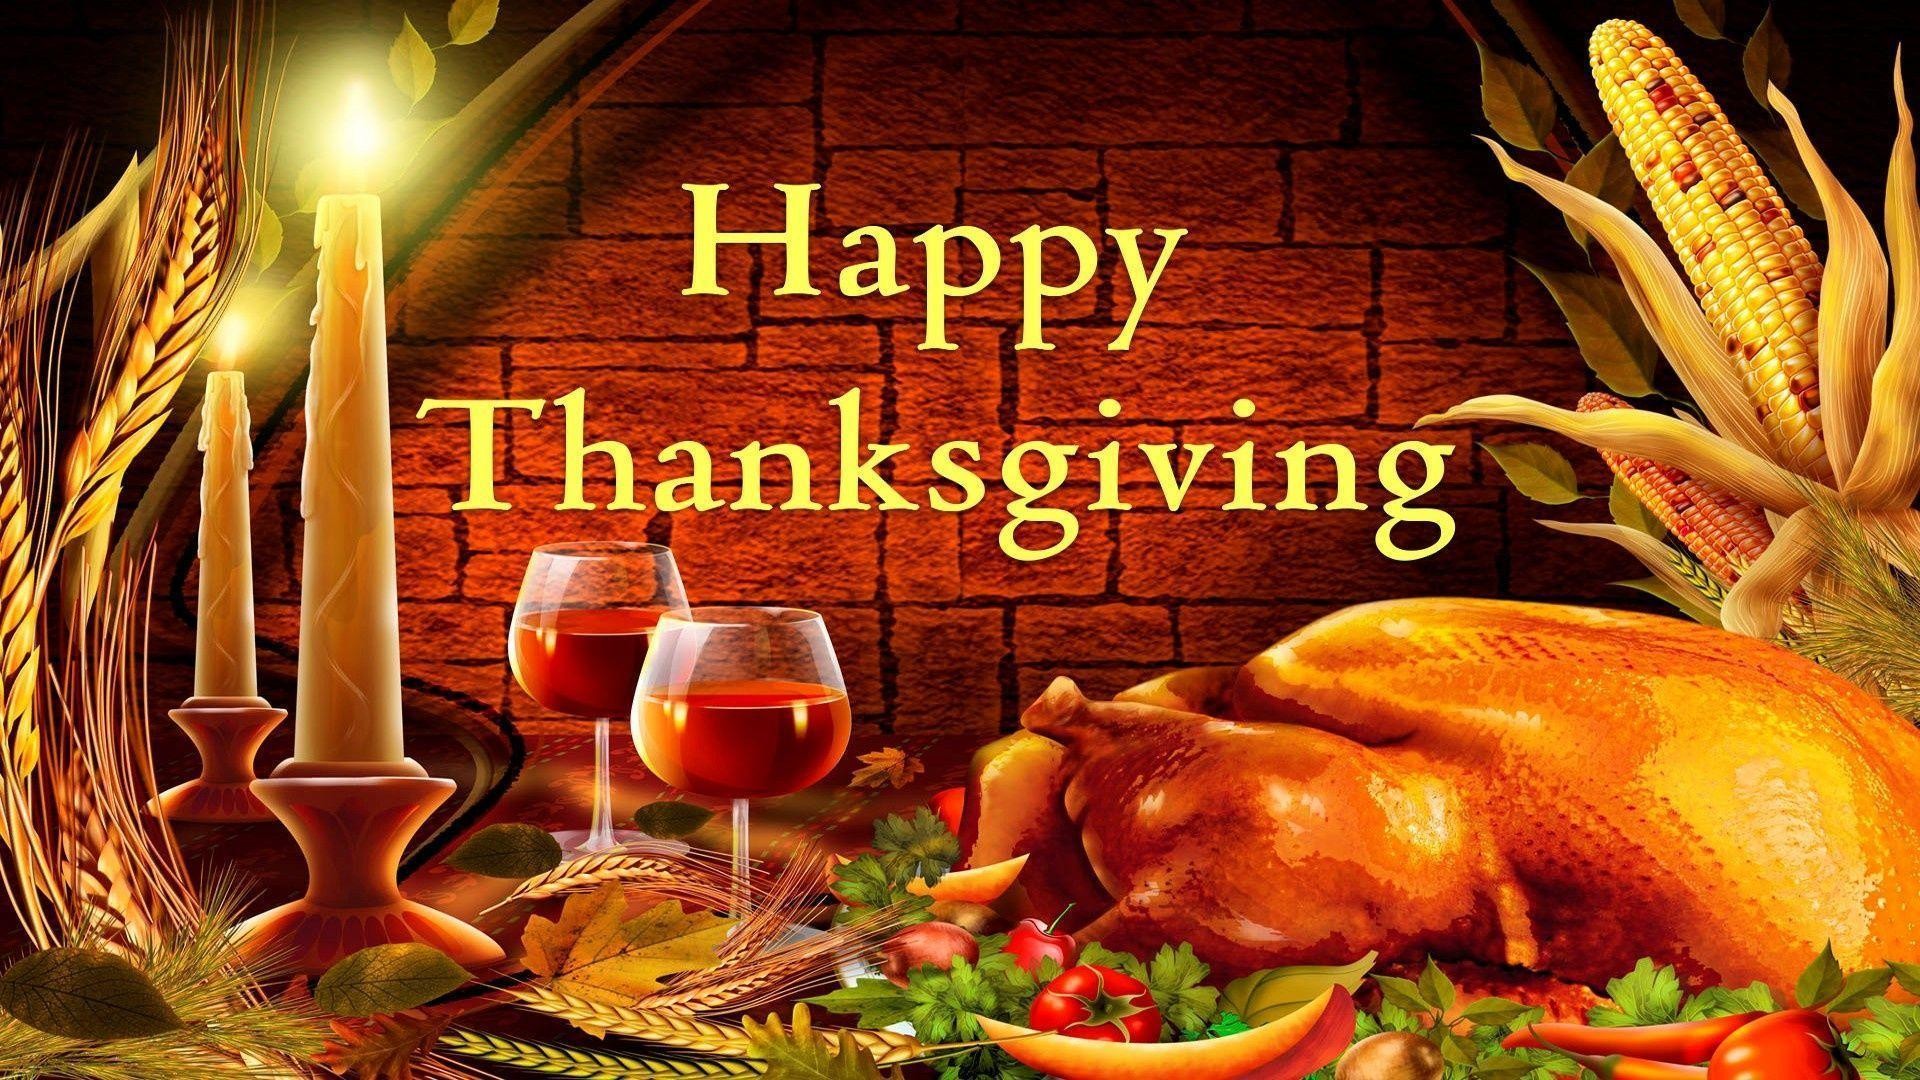 Thanksgiving Day 2019: Wishes, Quotes, Messages, Greetings & Images